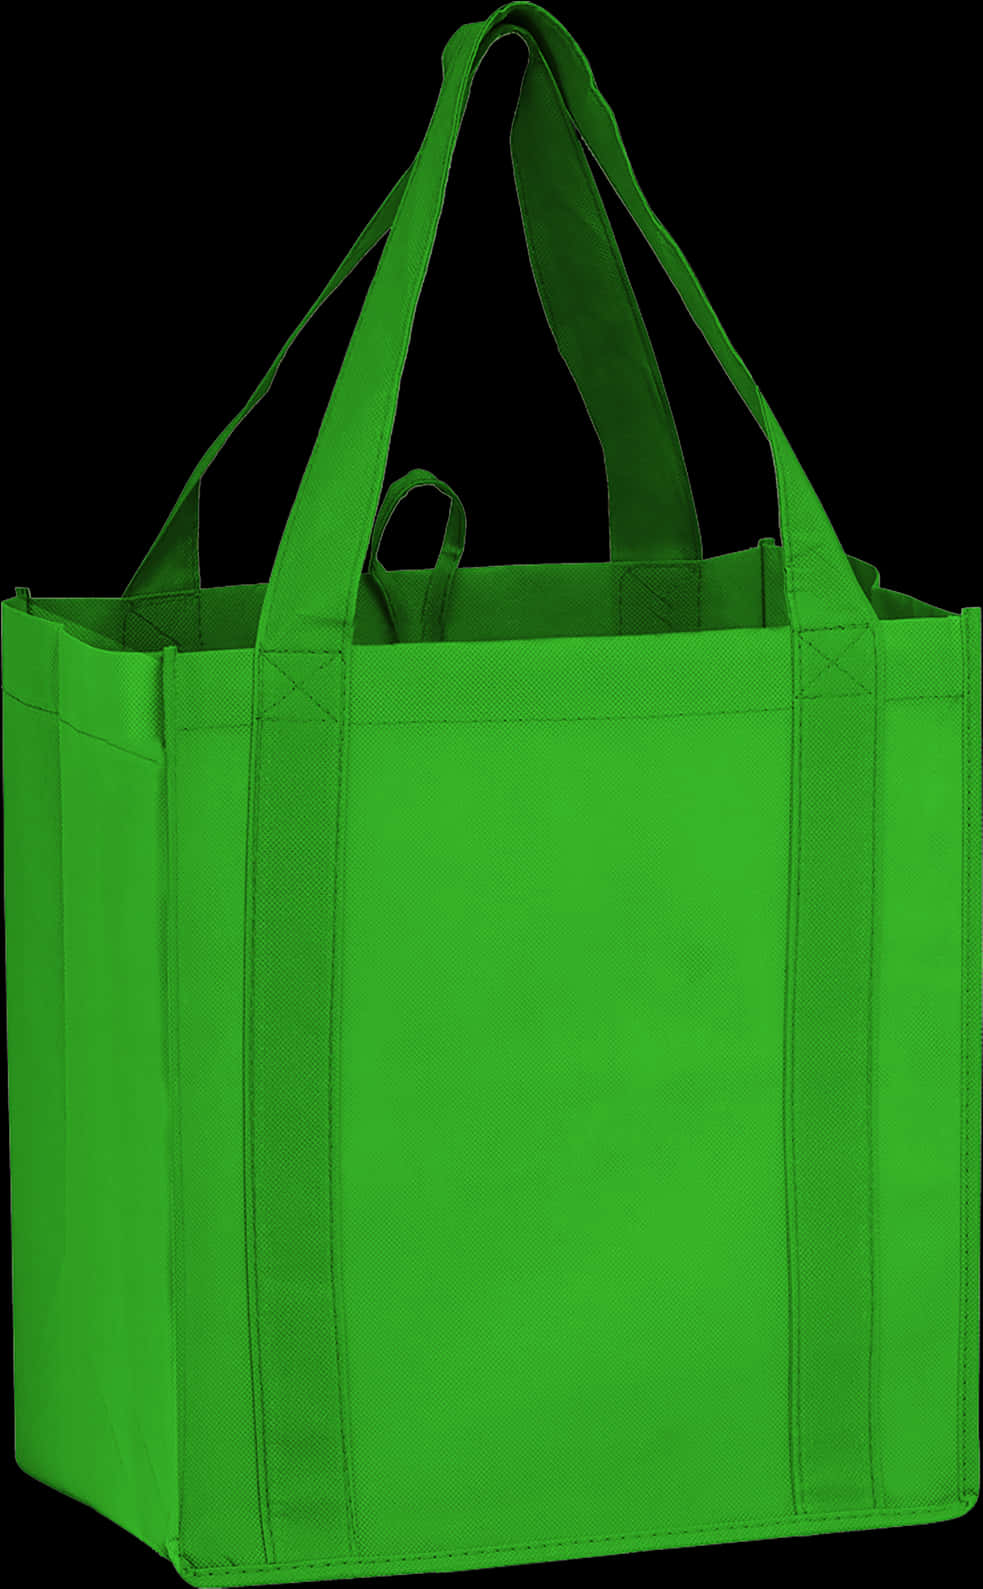 Green Tote Bag Isolated PNG